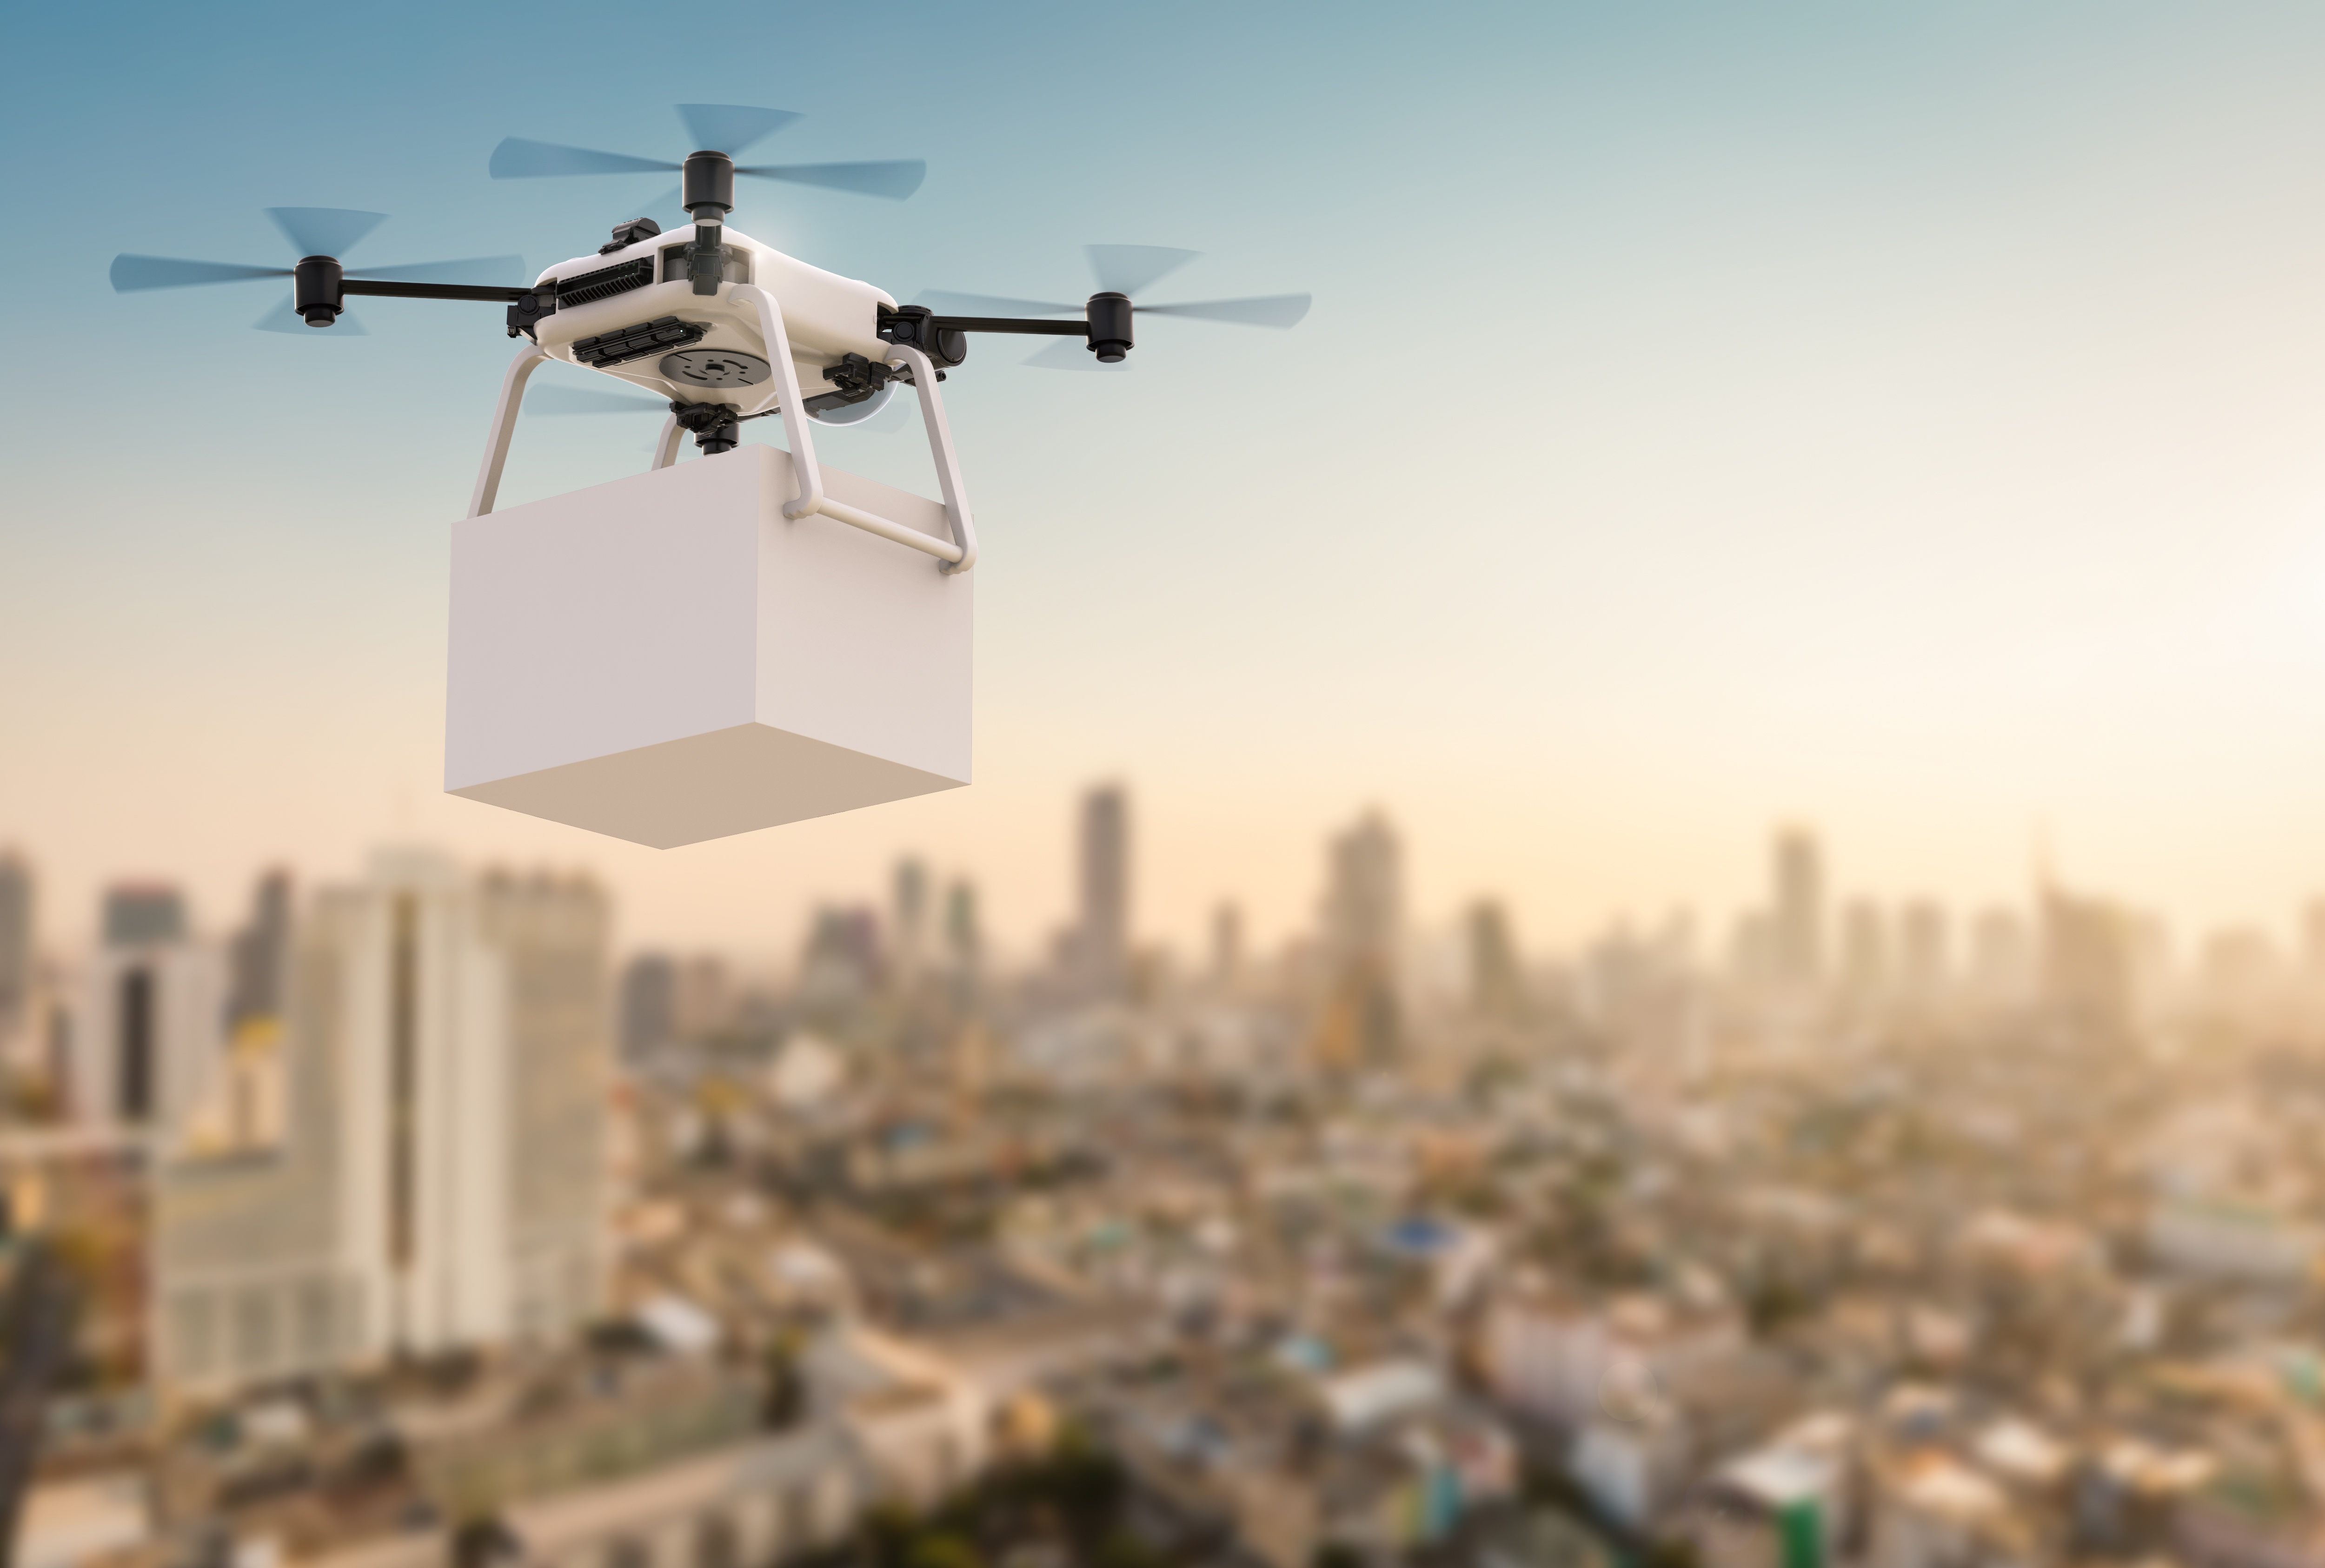 Regenerativ dyr Ombord From Parcels to Pizza: Are Drones the Future of Delivery?